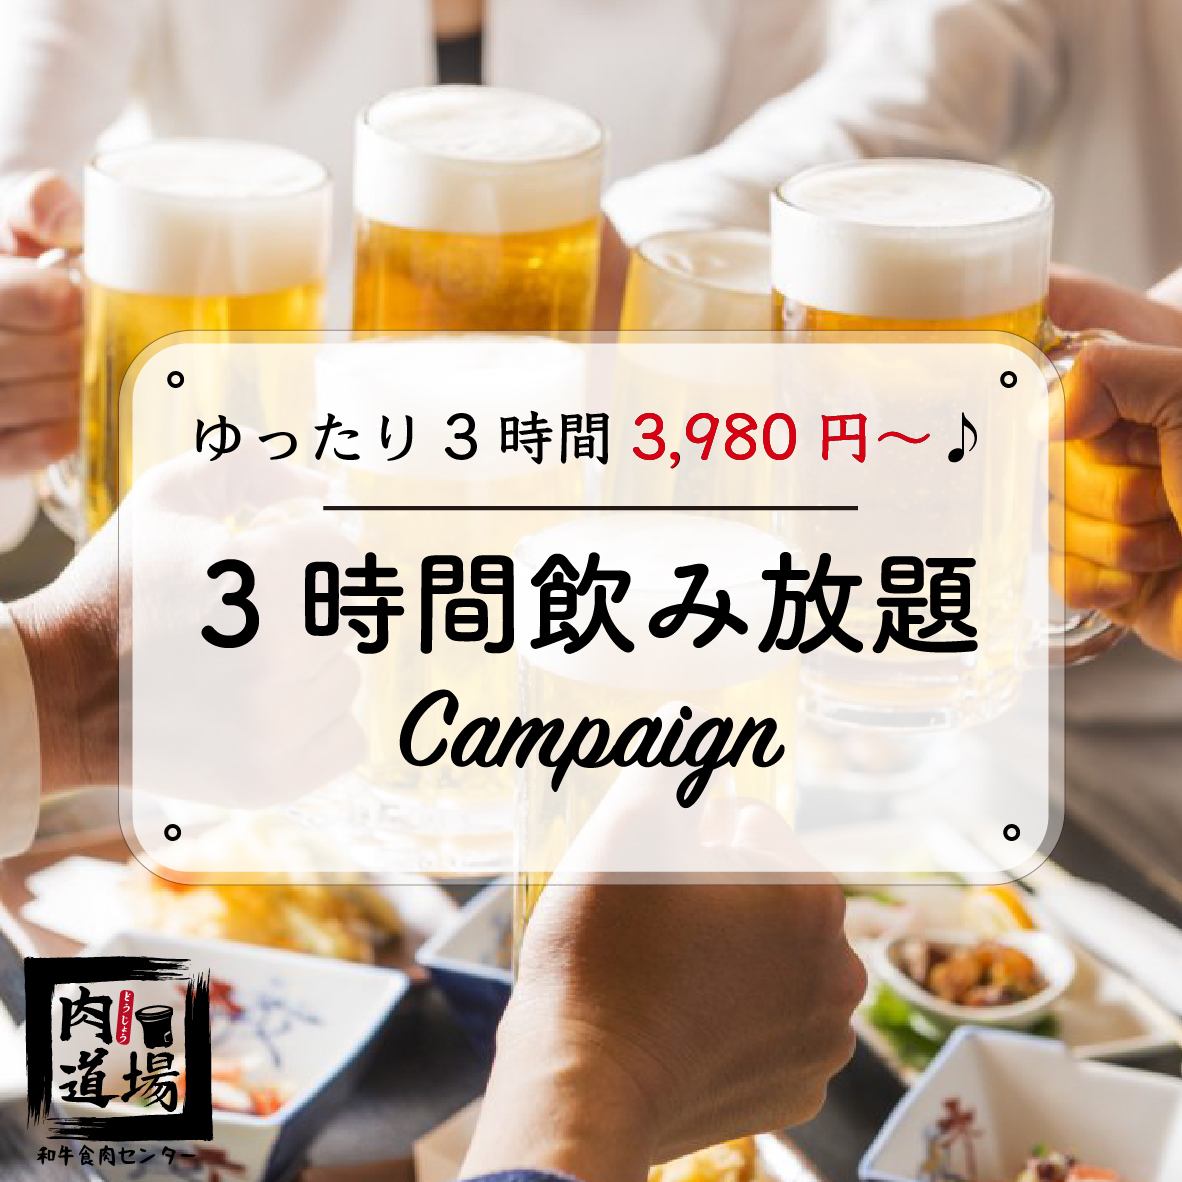 [Enjoy a relaxing banquet] Banquet with all-you-can-drink for 3 hours starts from 3,980 yen!